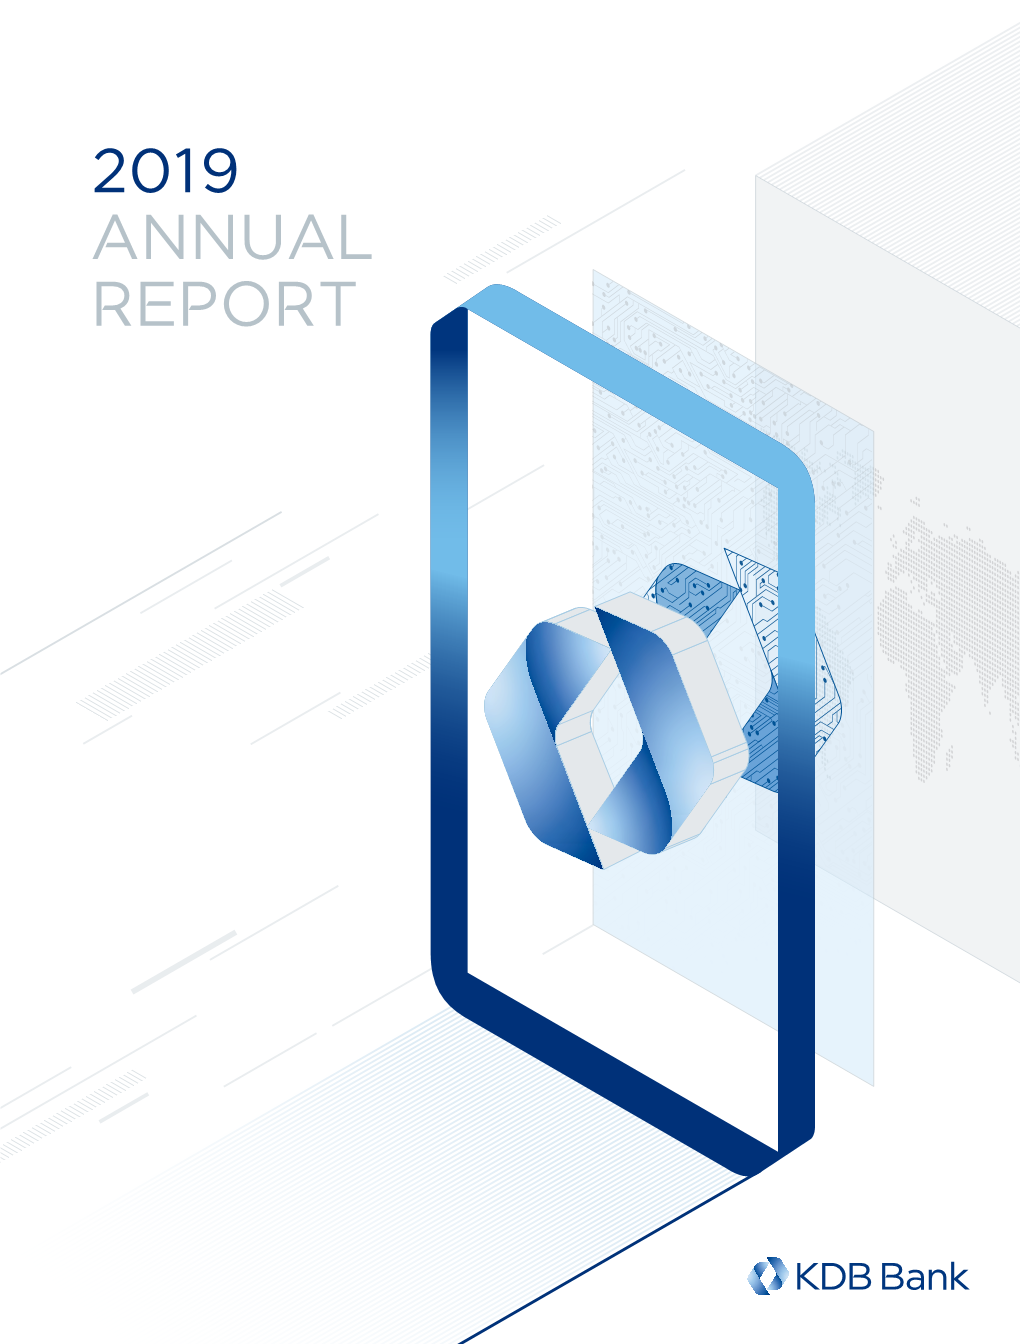 ANNUAL REPORT 2019 BUSINESS HIGHLIGHTS 011 New GROWTH 2019 Business Highlights INNOVATIVE GROWTH Innovation & Growth Banking Venture Finance